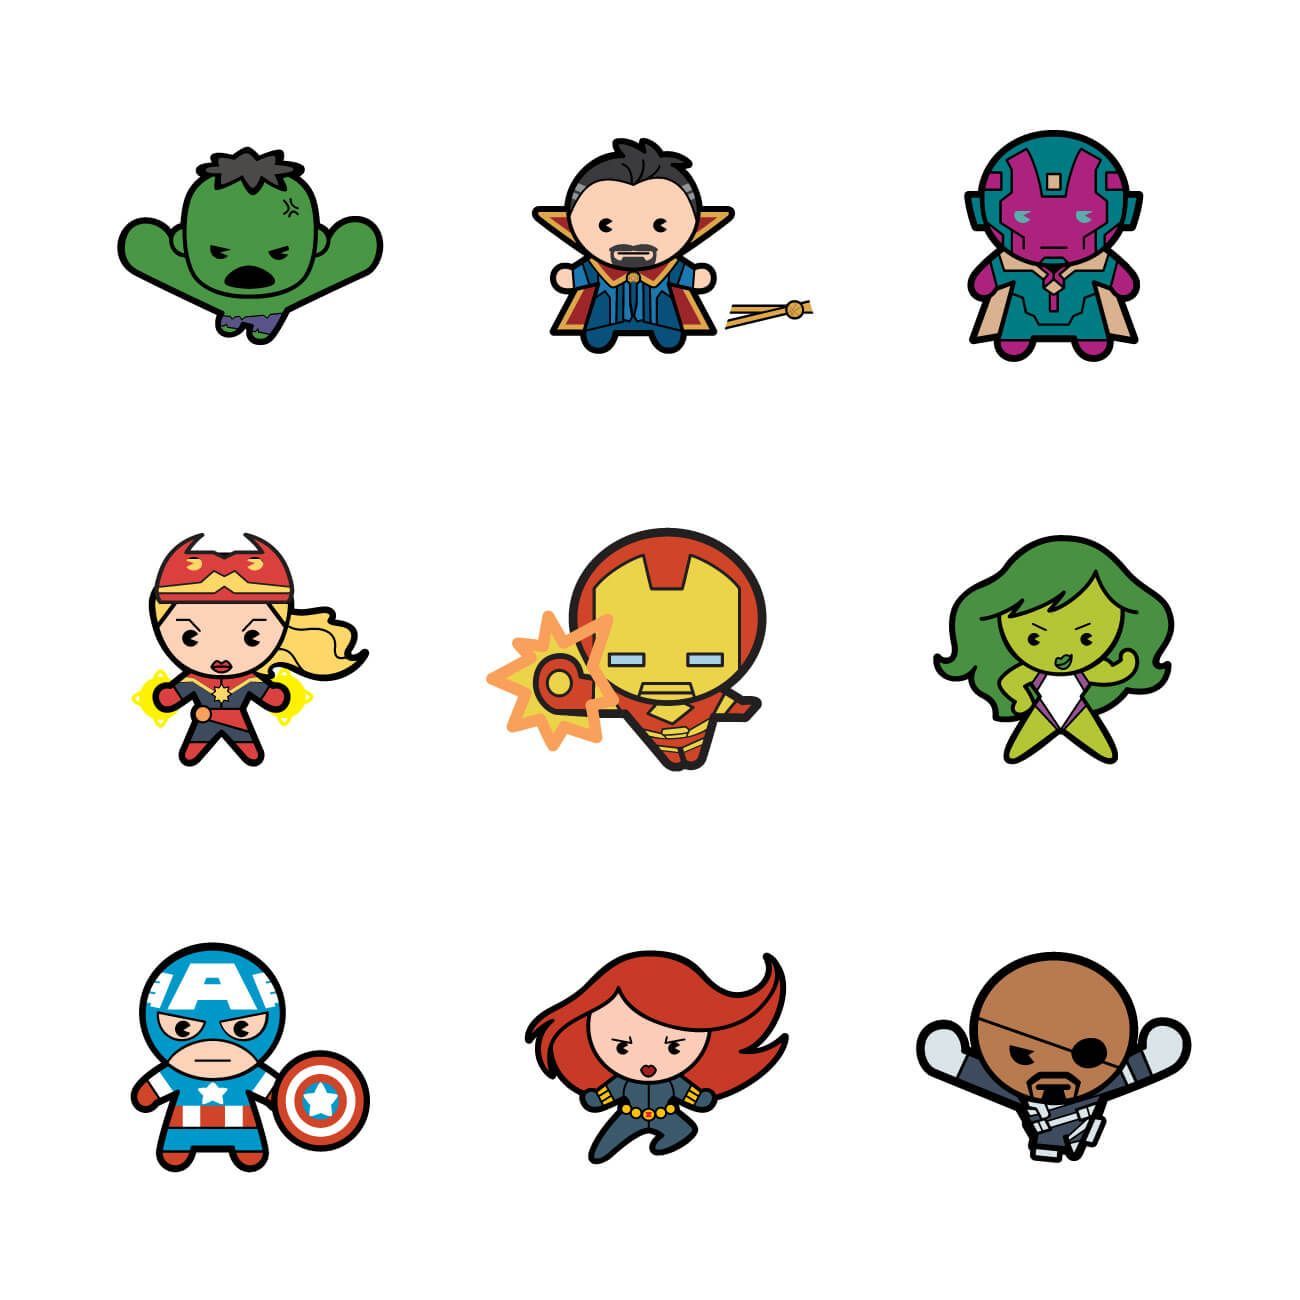 100+] Cute Marvel Wallpapers | Wallpapers.com